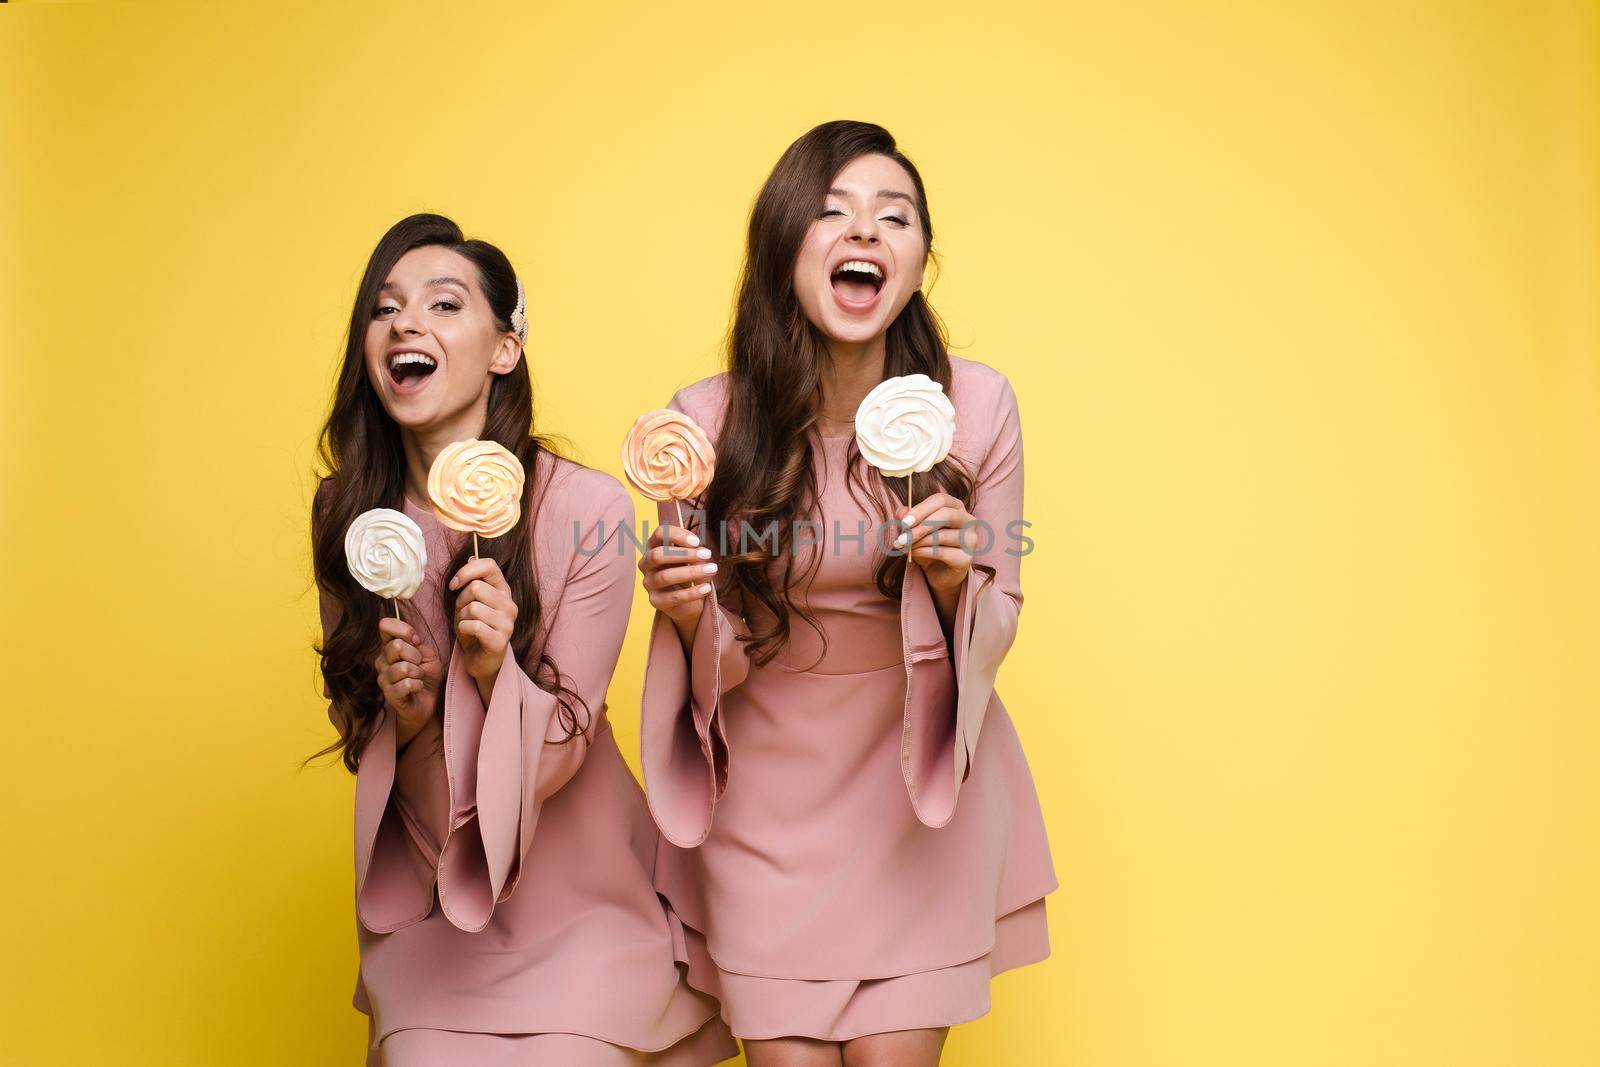 Charming twins closing eyes with lollipops and posing by StudioLucky